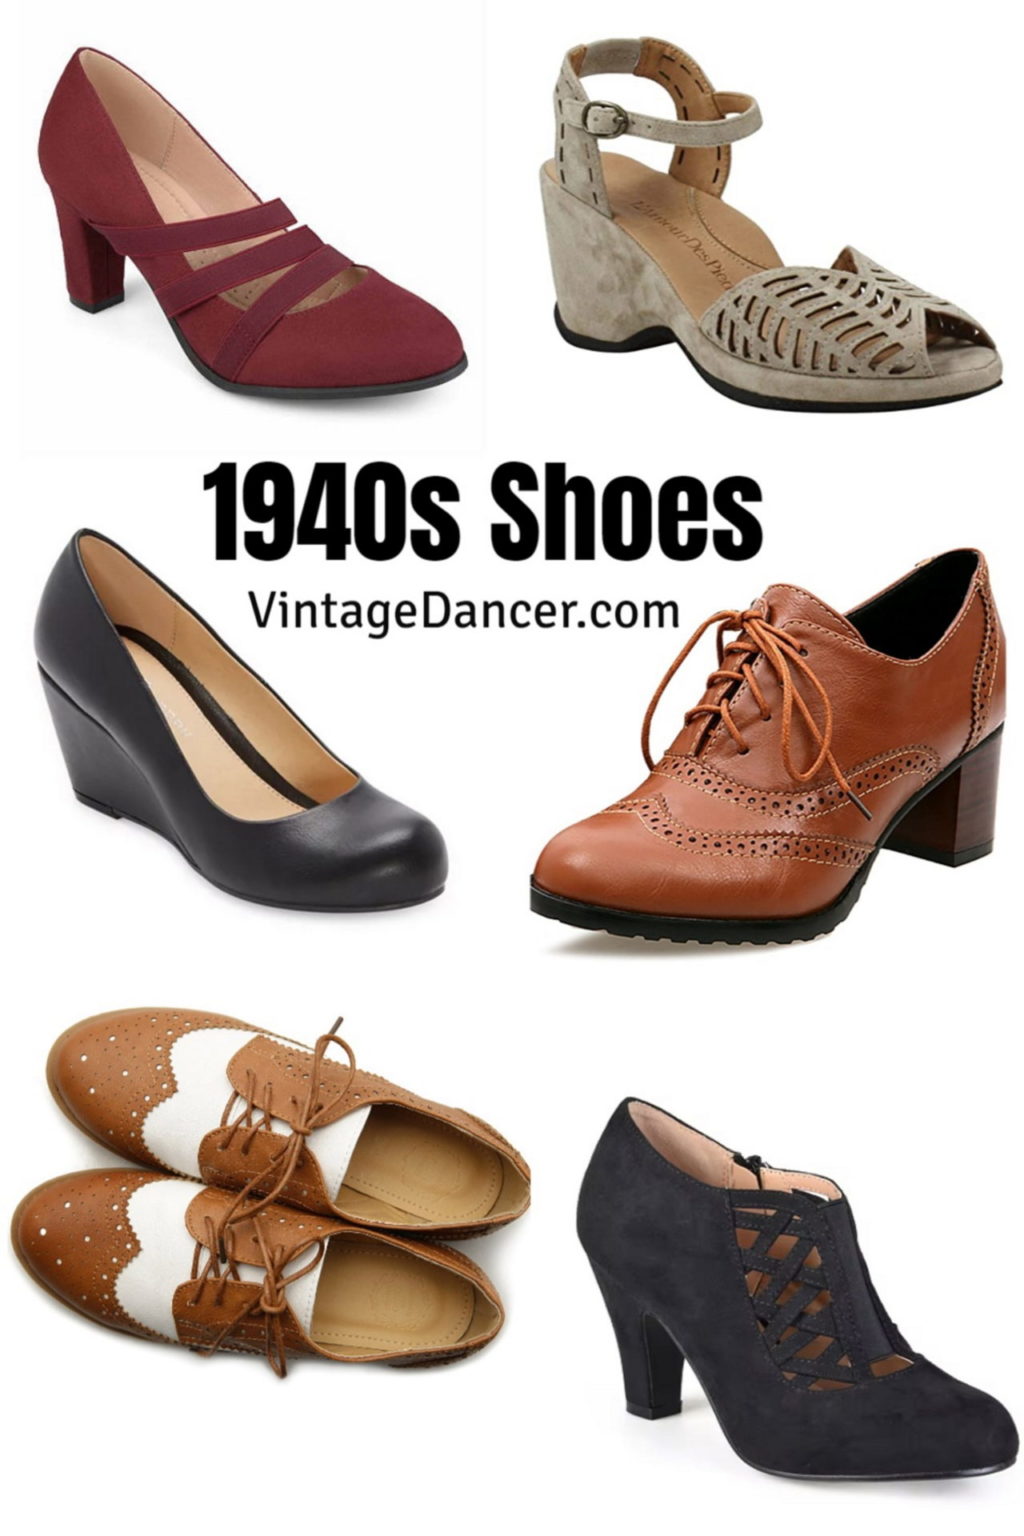 1940s Reproduction Clothing Brands | Where to Buy 1940s clothes?